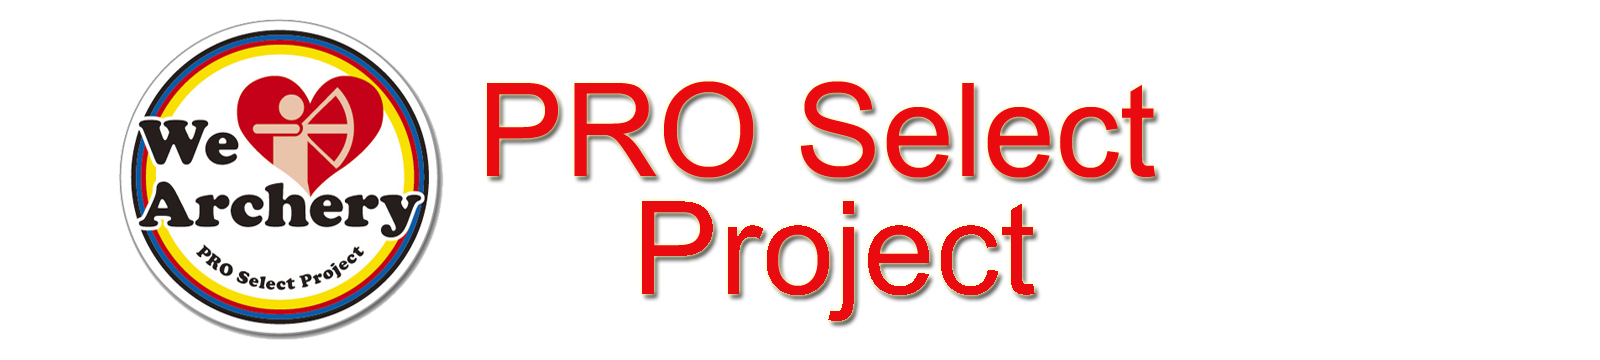 PRO Select Project